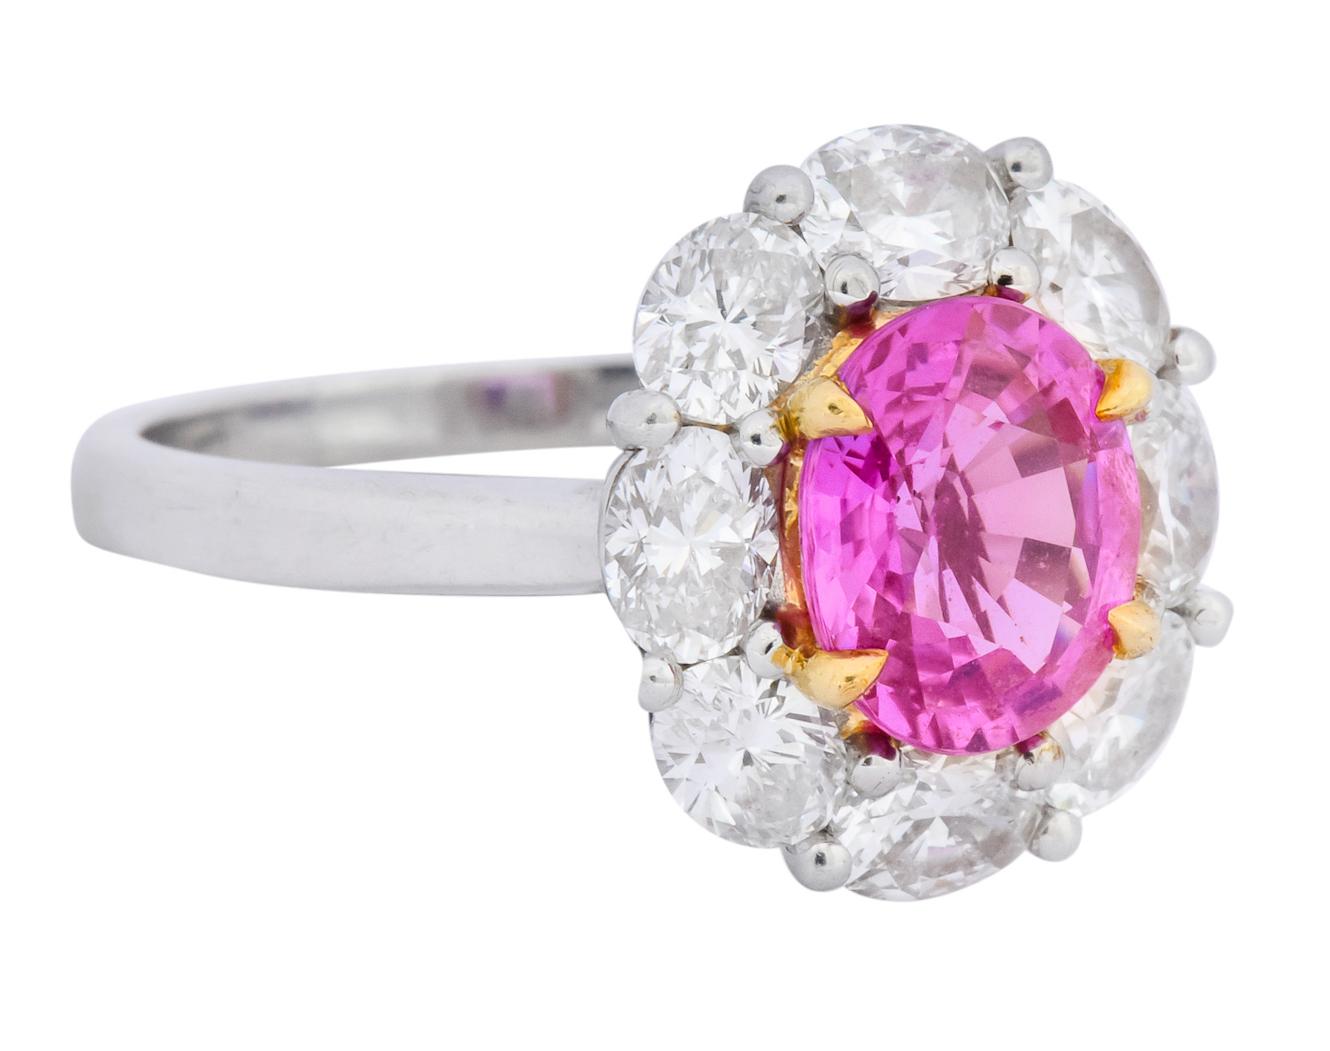 Centering an oval cut pink sapphire, claw set in 18 karat yellow gold, weighing approximately 2.25 carats

Sapphire is a transparent, saturated pink with hints of violet

With a surround of oval cut diamonds weighing approximately 2.00 carat total,